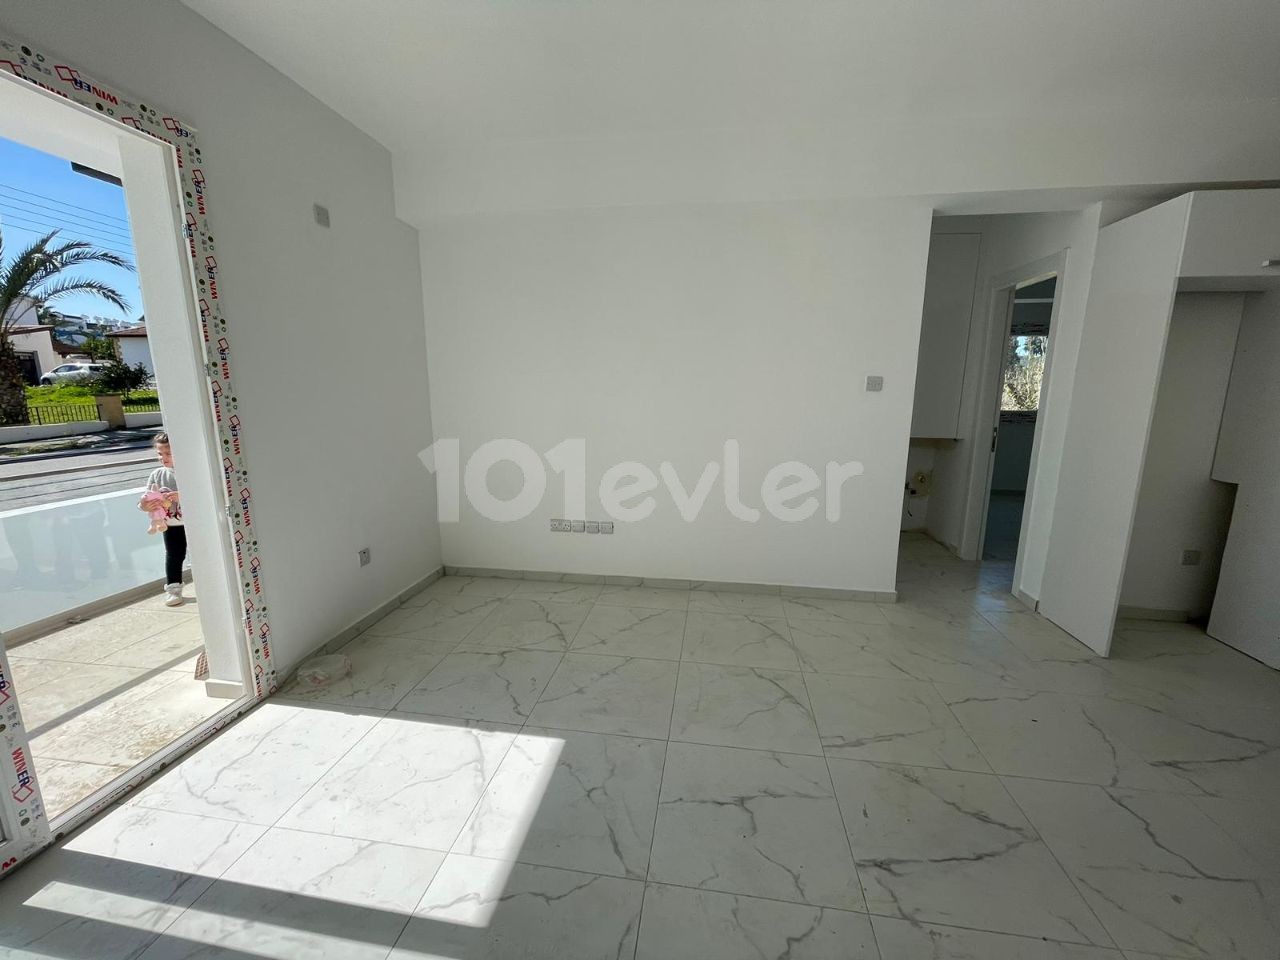 Newly Finished 1st Floor 2+1 Apartment for SALE in Lefkosa Gonyeli Area!